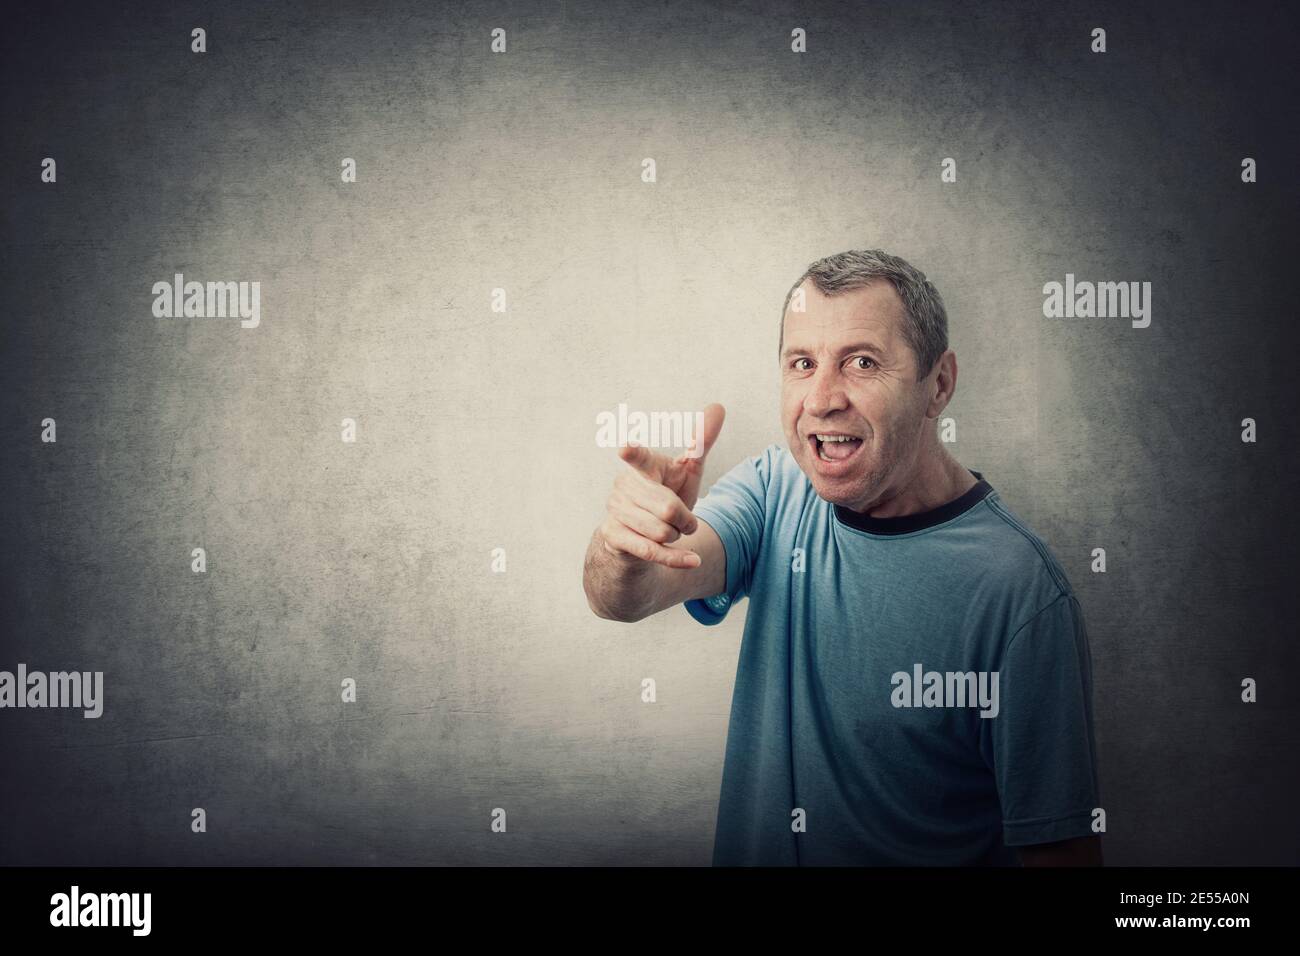 Angry middle aged man pointing index finger screaming, like scolding someone, isolated on grey wall background with copy space. Irritated and annoyed Stock Photo